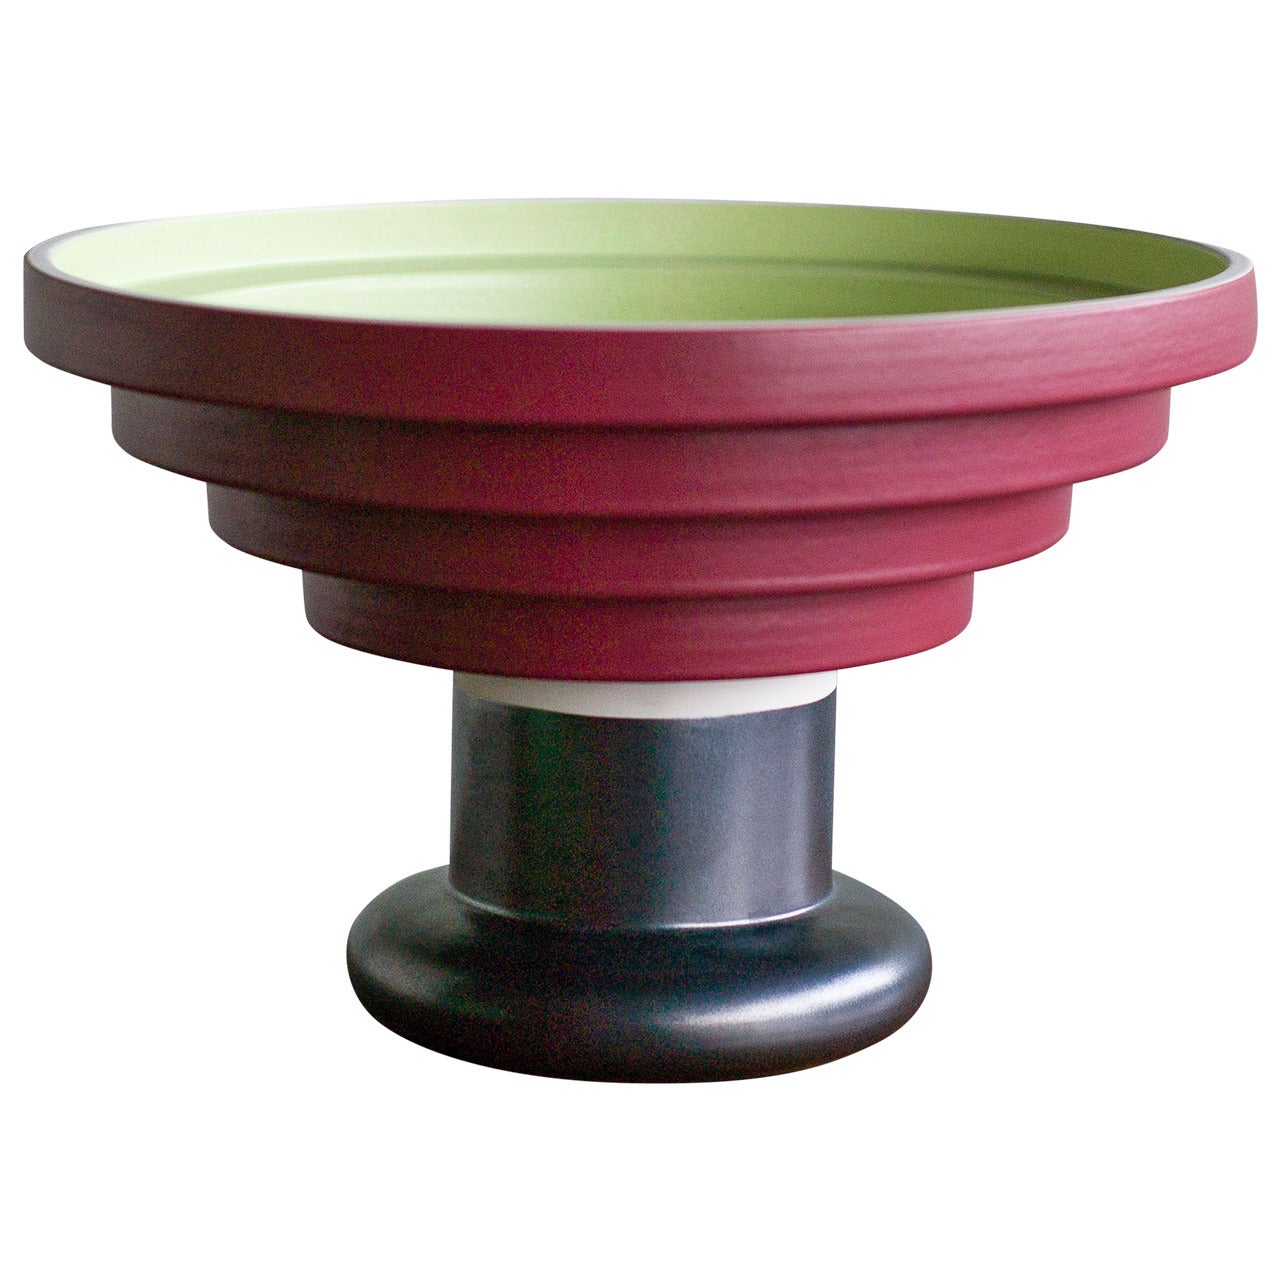 Very Large Ceramic Bowl by Ettore Sottsass for Bitossi